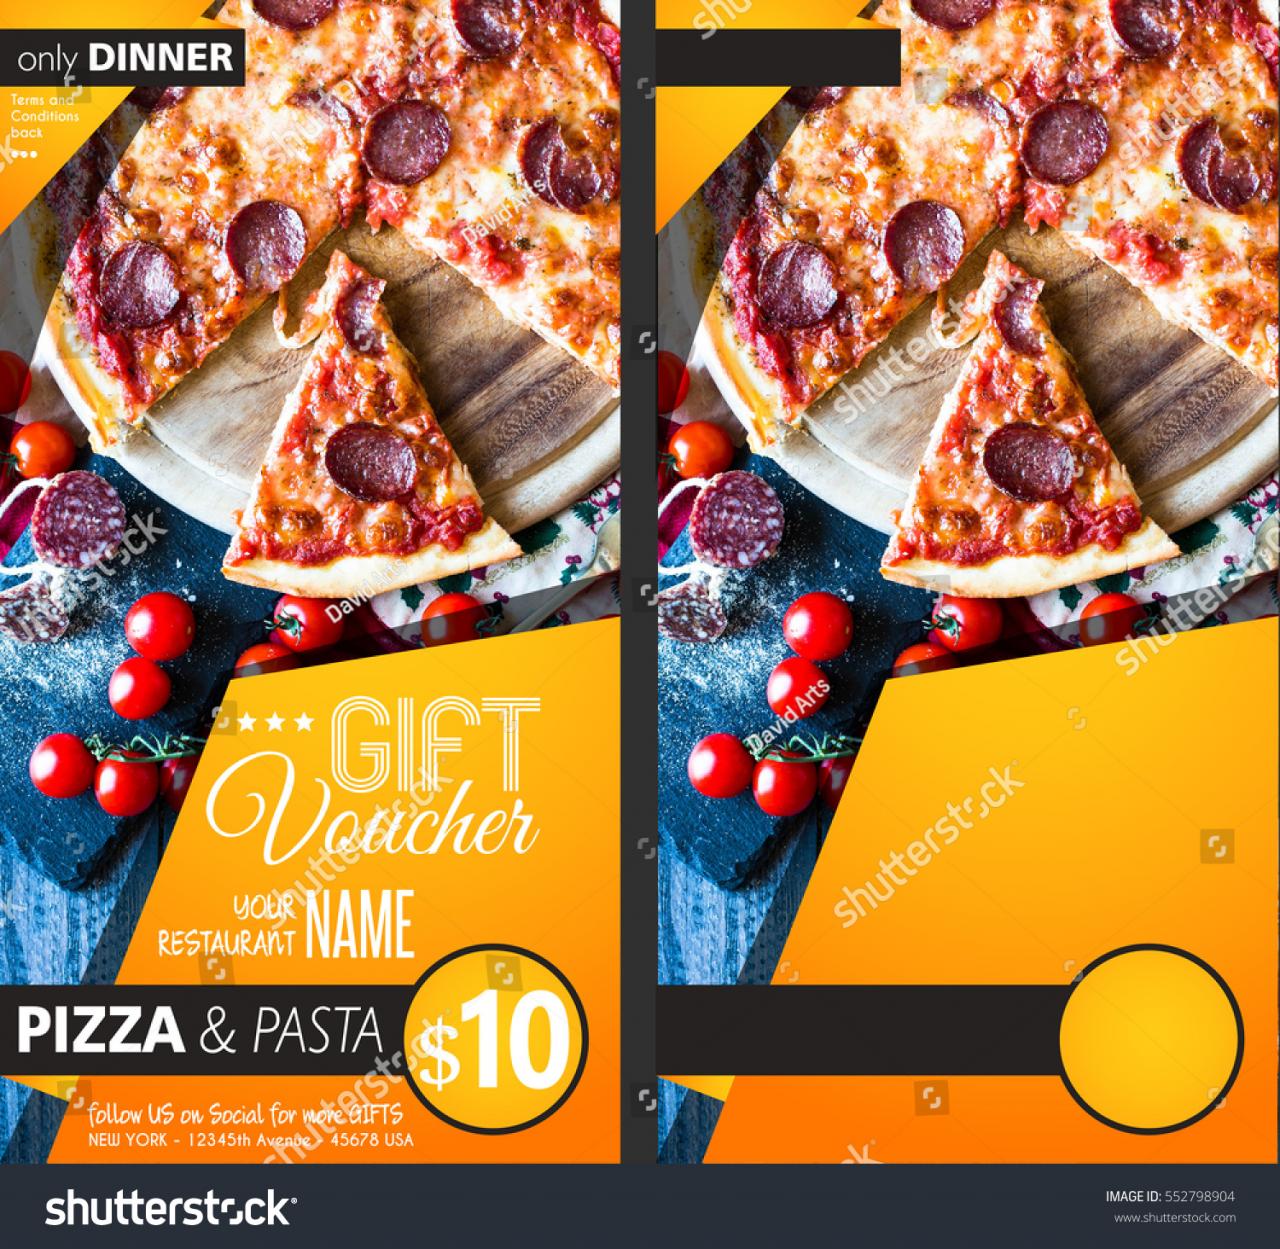 Restaurant Gift voucher flyer template with delicious taste pepperoni cheese pizza and space for your text.